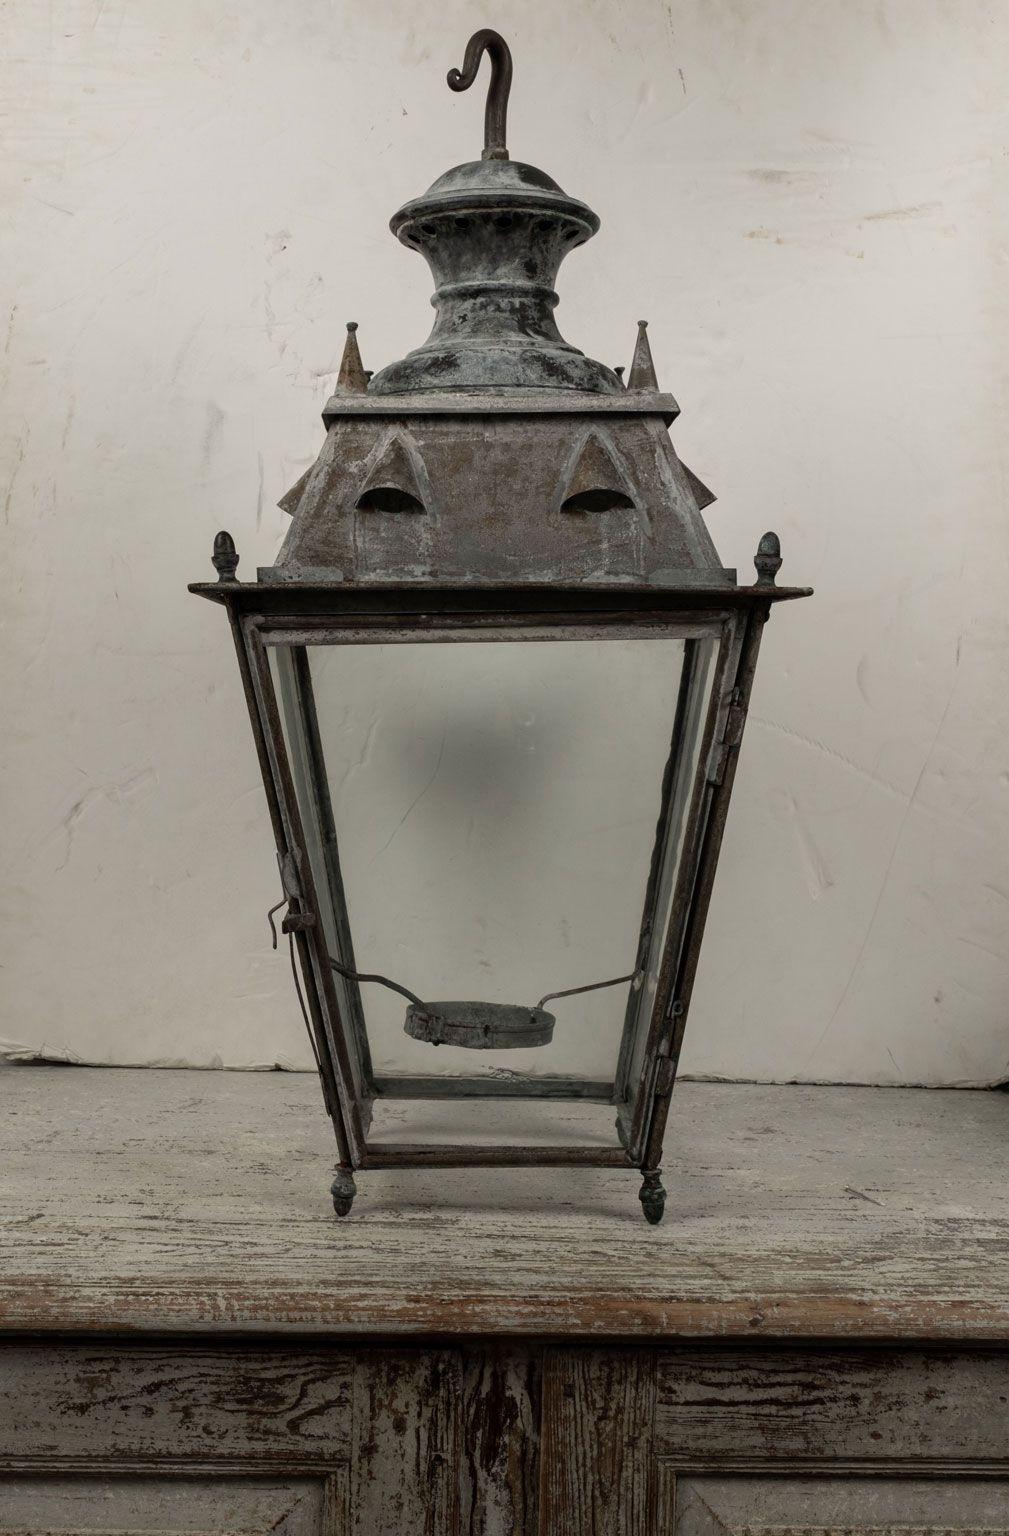 Tole and glass French lantern dating to 19th century. Four-sided iron frame, tole top and glass paneled sides. Not wired for electricity, but can be wired, or fitted for usage with gas, for an additional cost.